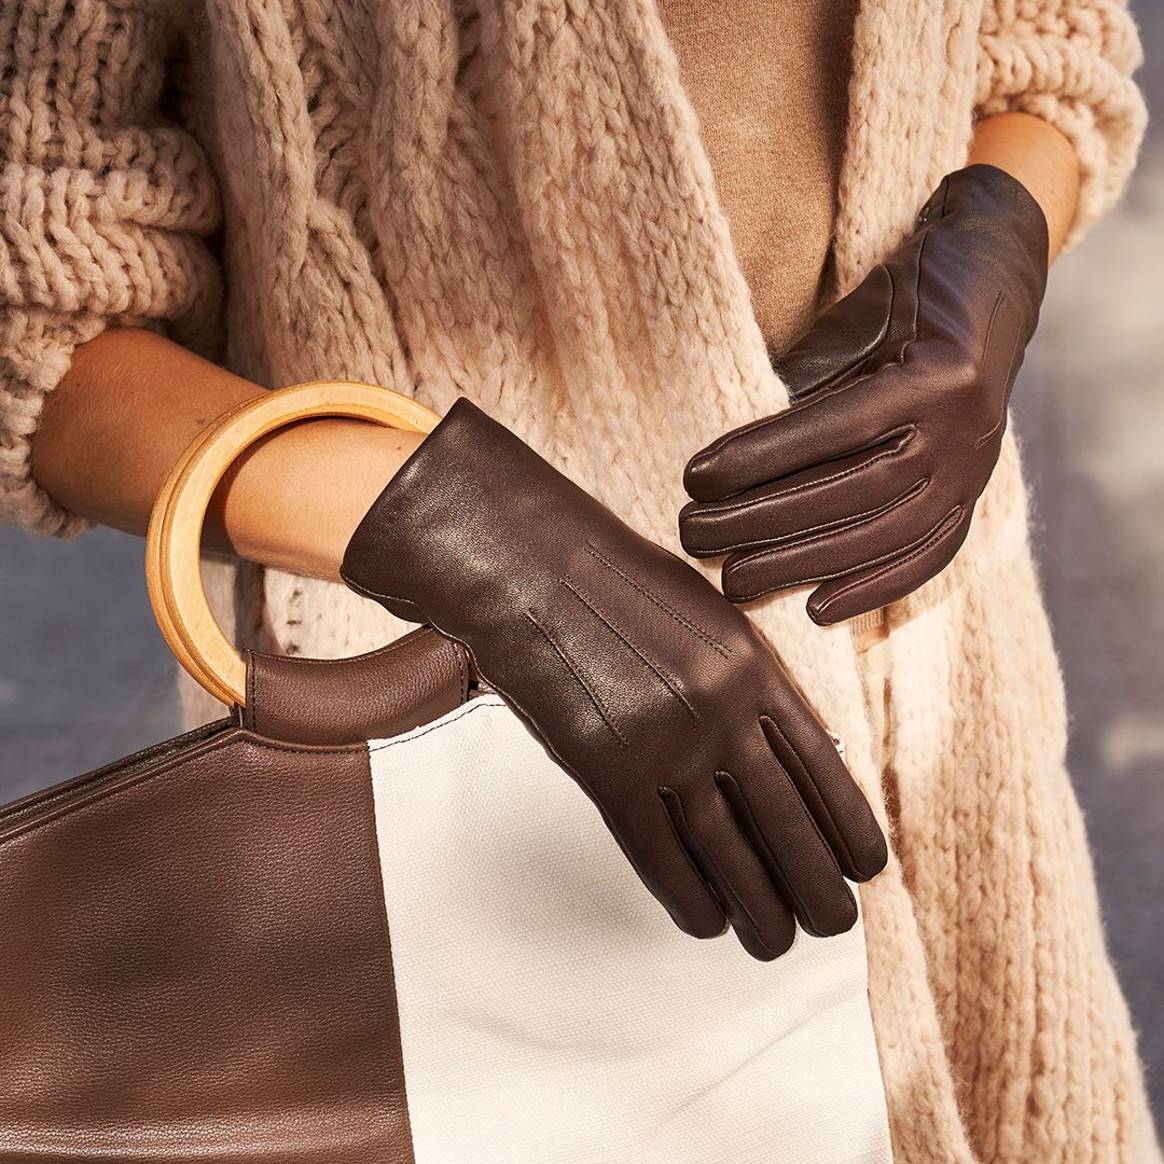 napo gloves: premium leather gloves with innovative touchscreen technology